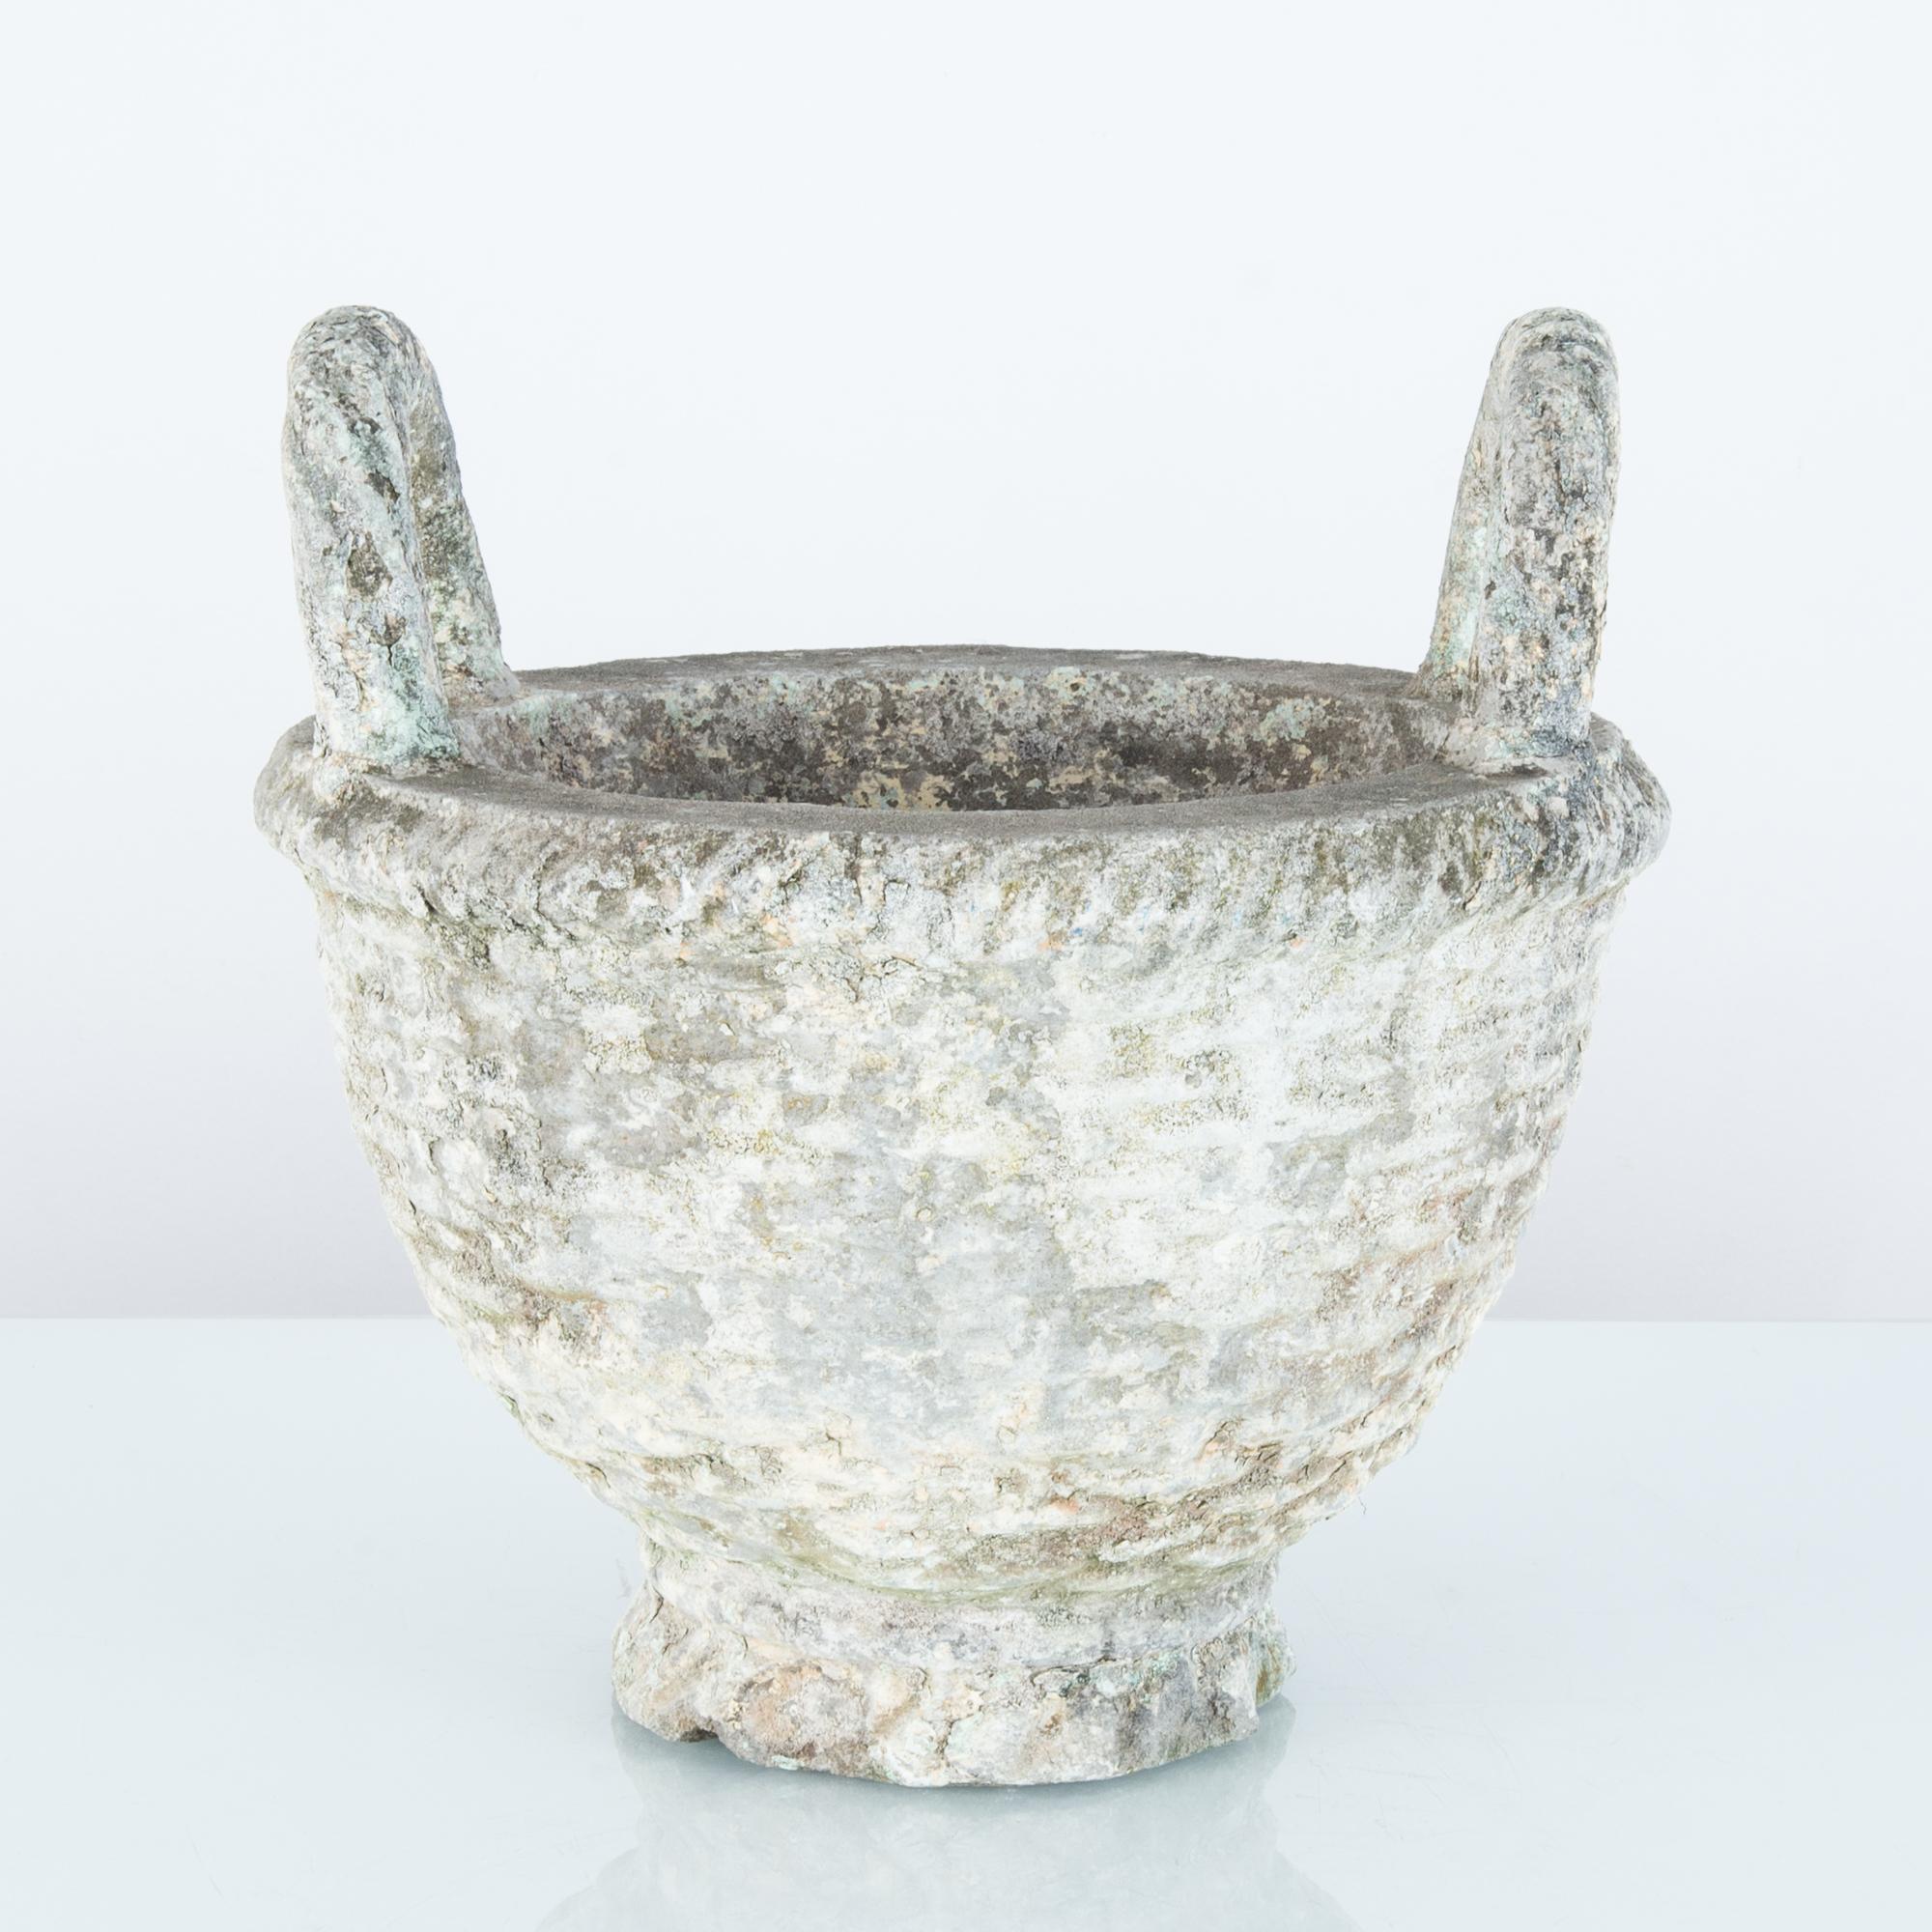 A concrete planter from France, circa 1960. The concrete has been cast into the form of a wicker basket with two upraised handles. Originally painted a creamy white, the surface has weathered into a variegated patina, with accents of lichen yellow